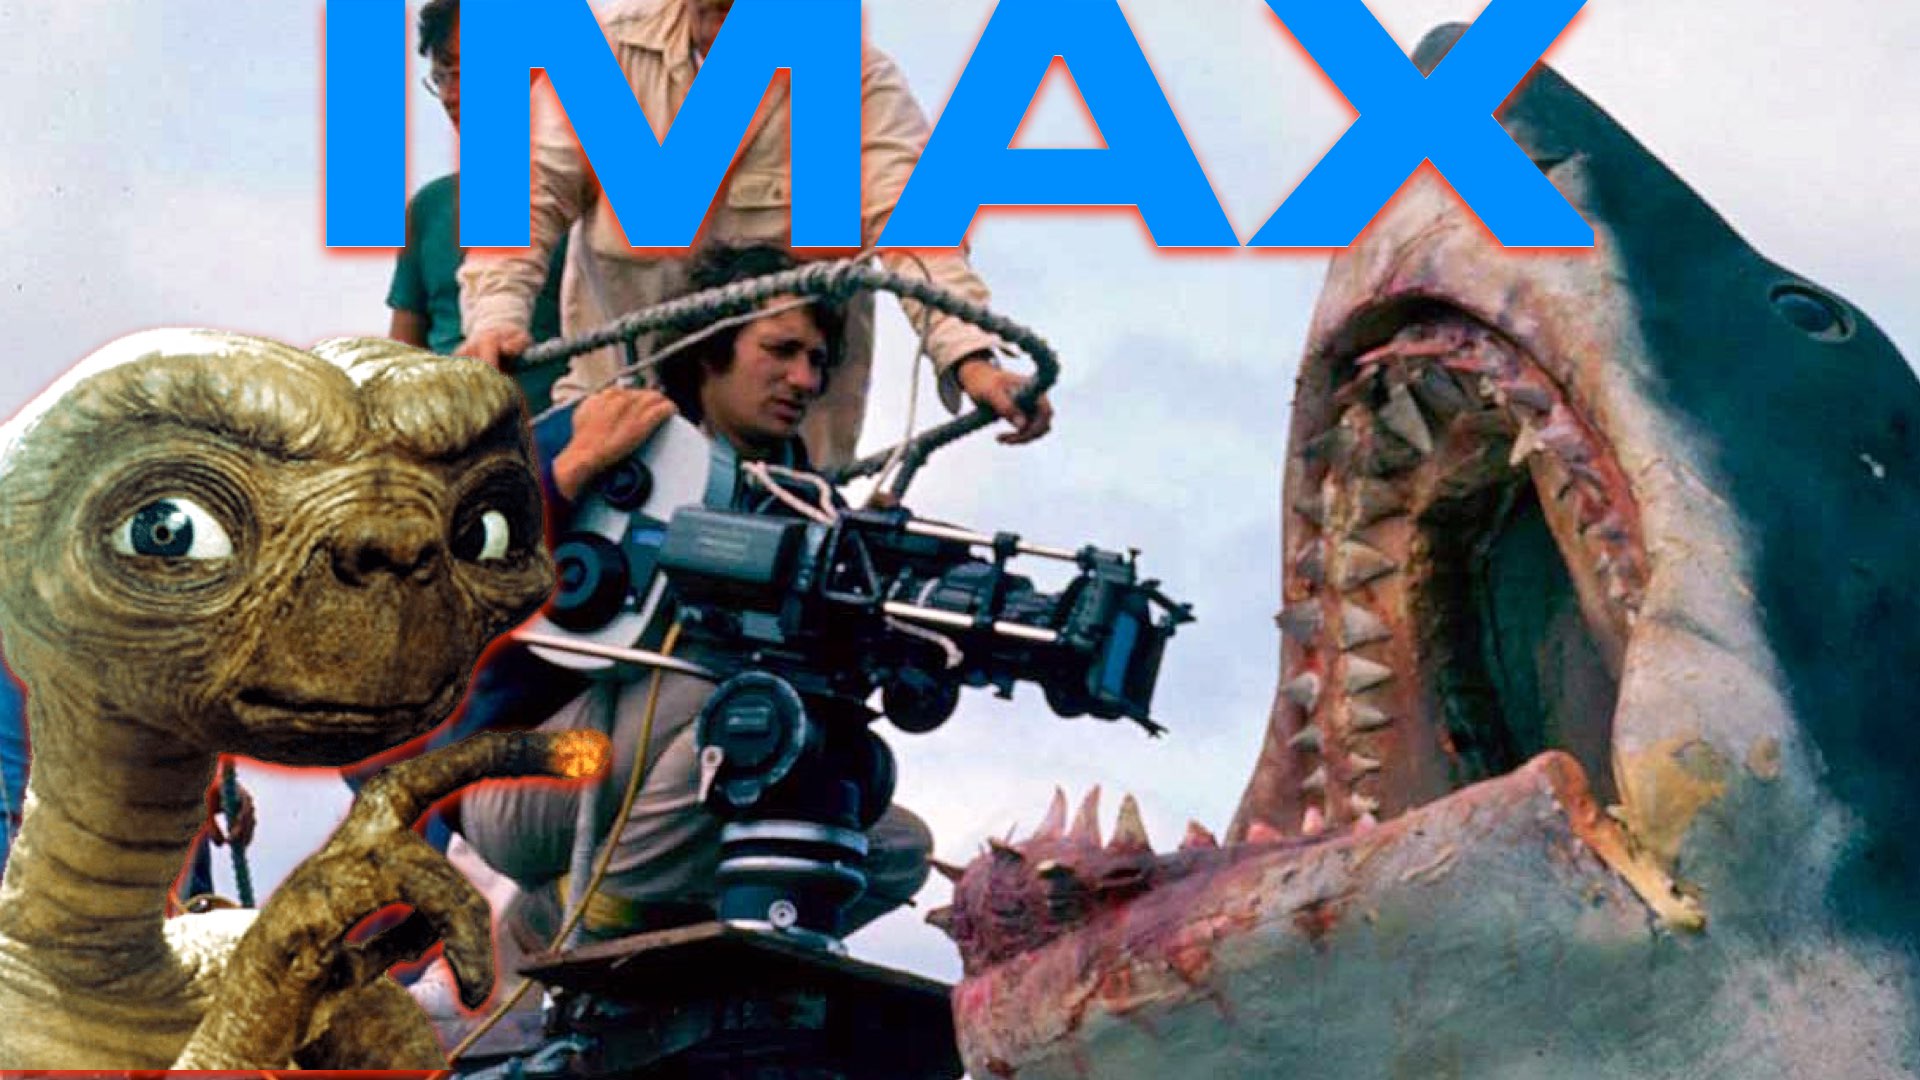 The Two Masterpieces E.T. and JAWS are Coming to IMAX